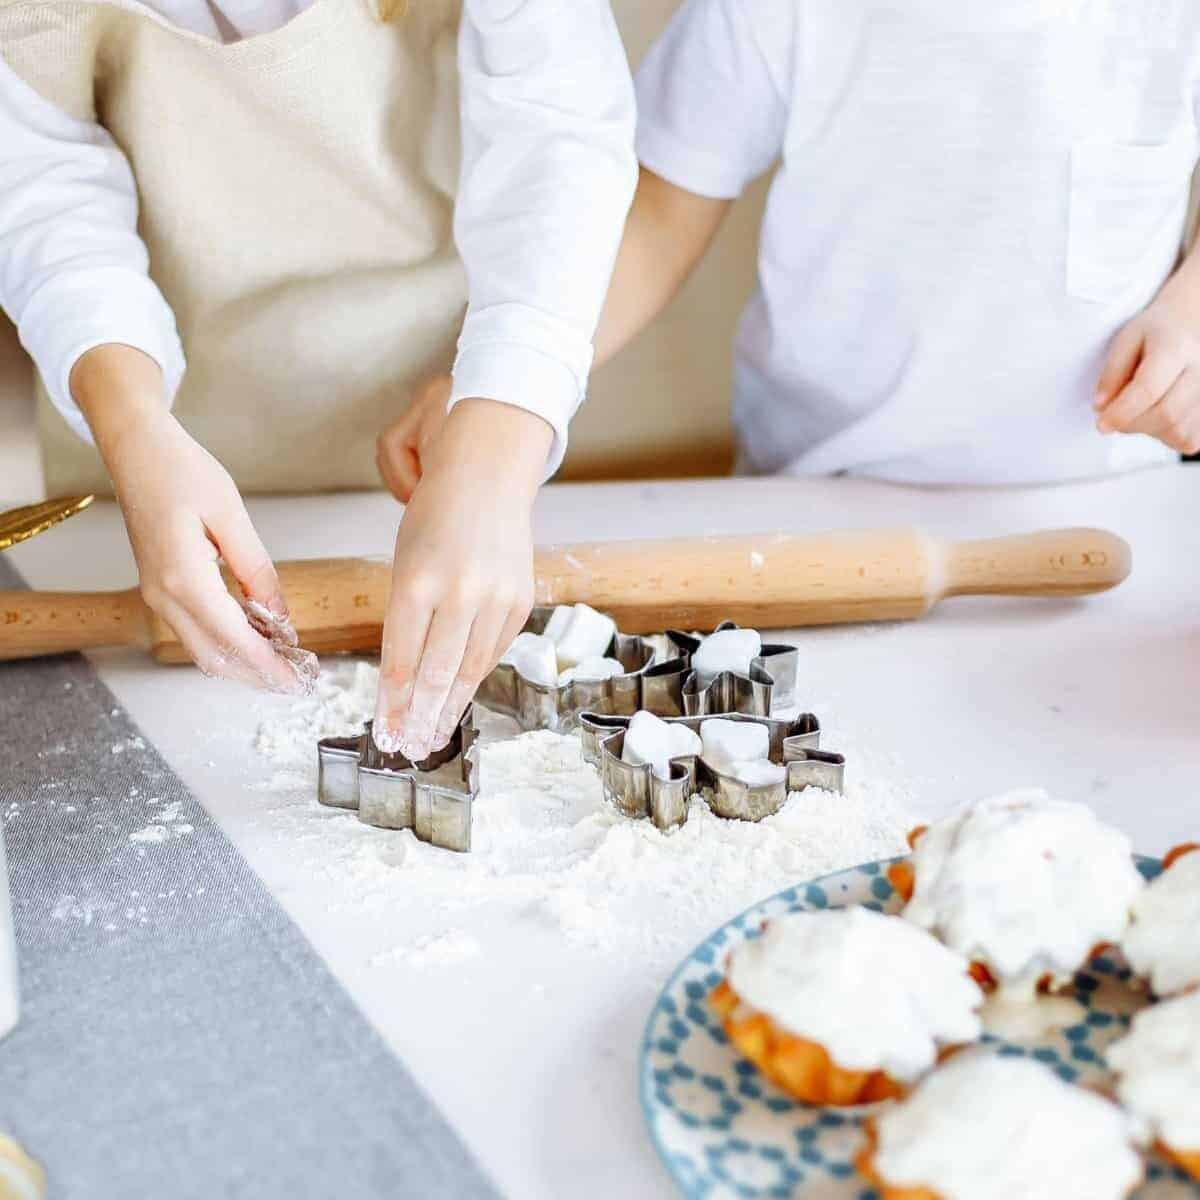 kids baking christmas cookies in the kitchen